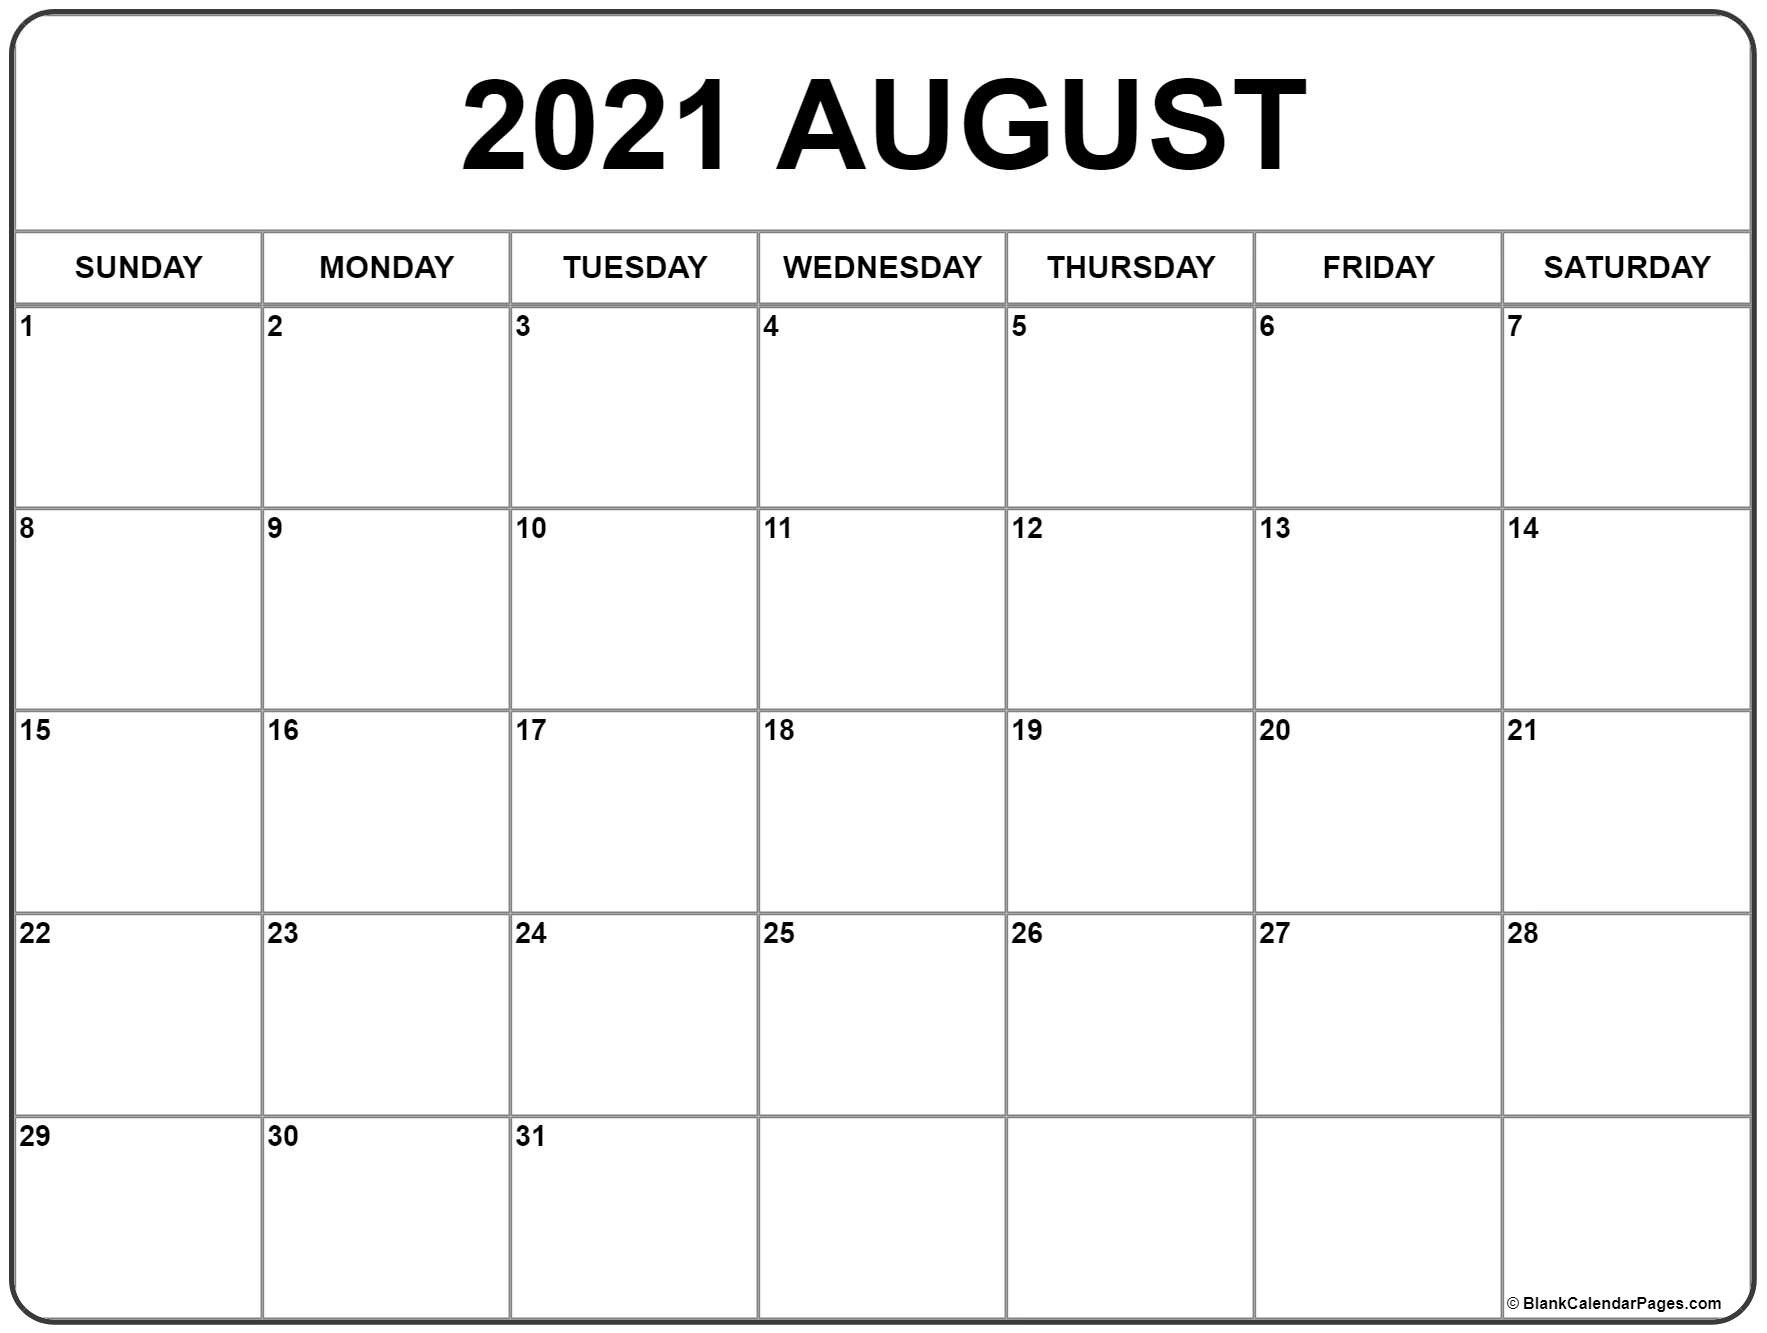 August 2021 Calendar | Free Printable Monthly Calendars-Printable Calendar July 2021 And August 2021